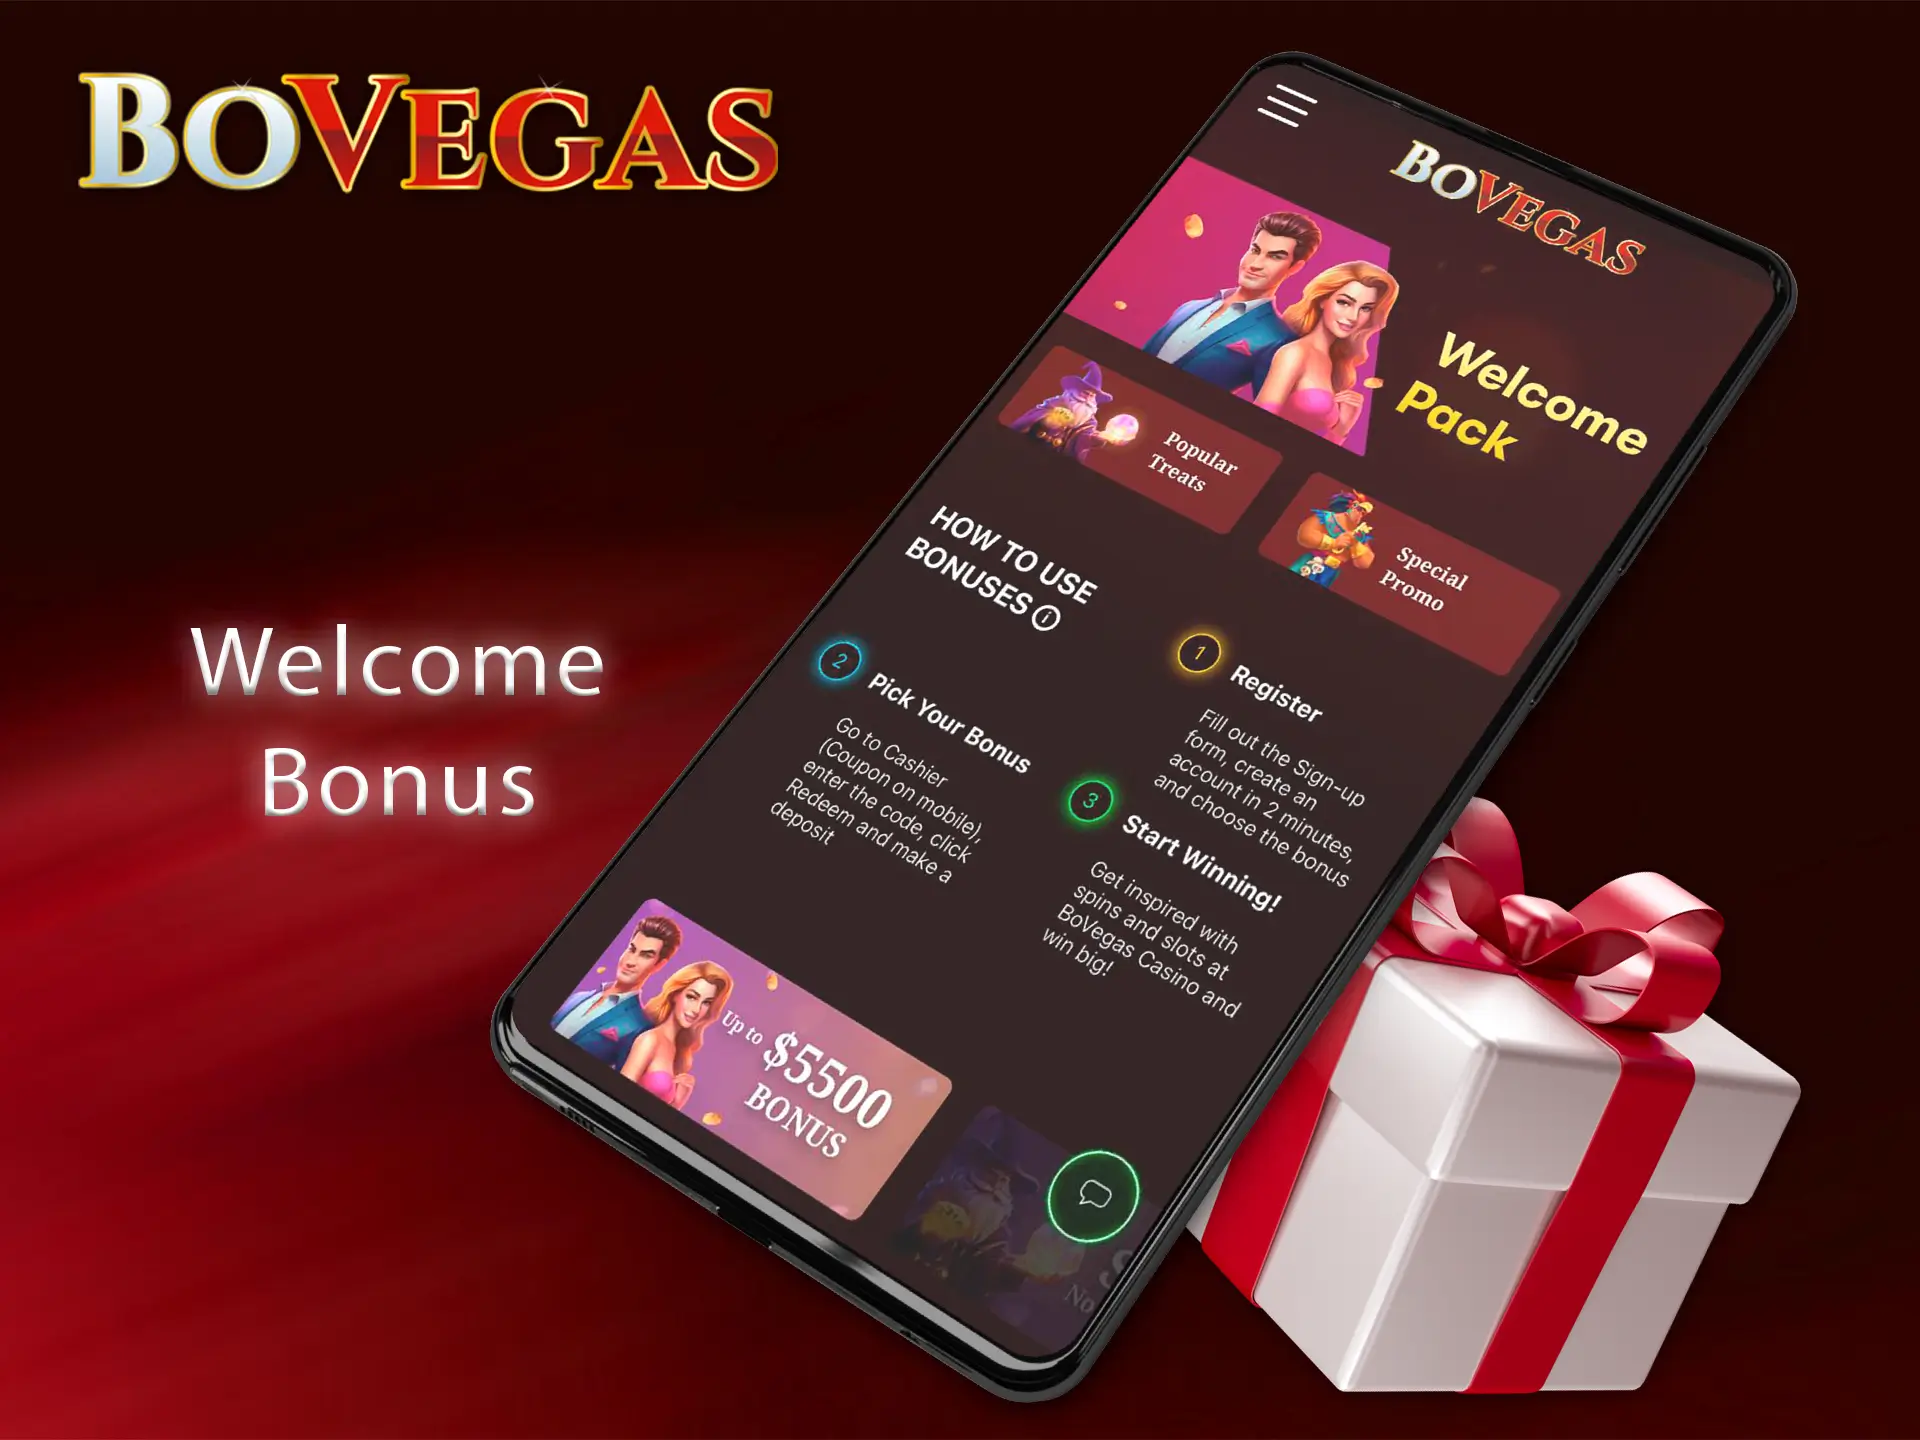 Get a 250% welcome bonus of up to AUD 8,500 on the BoVegas app.